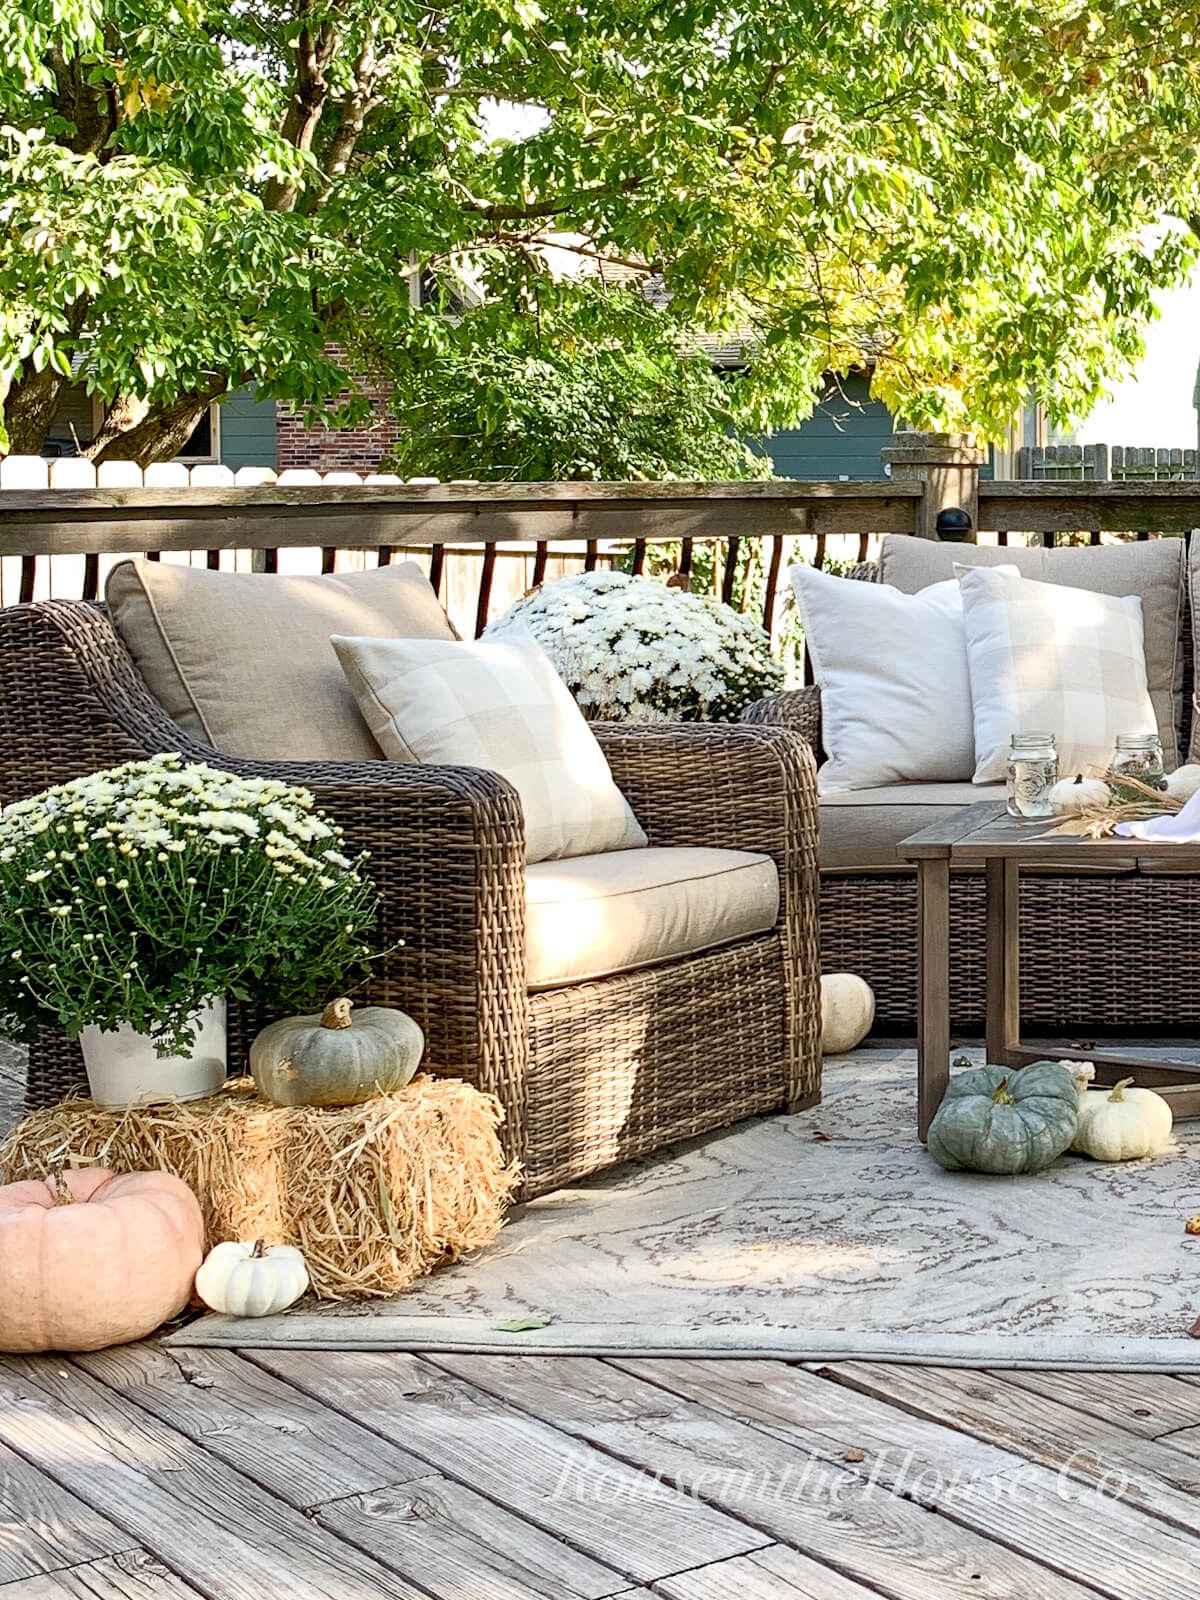 Outdoor fall decor on the back deck include cozy throw pillows, white mums, and heirloom pumpkins of various sizes.